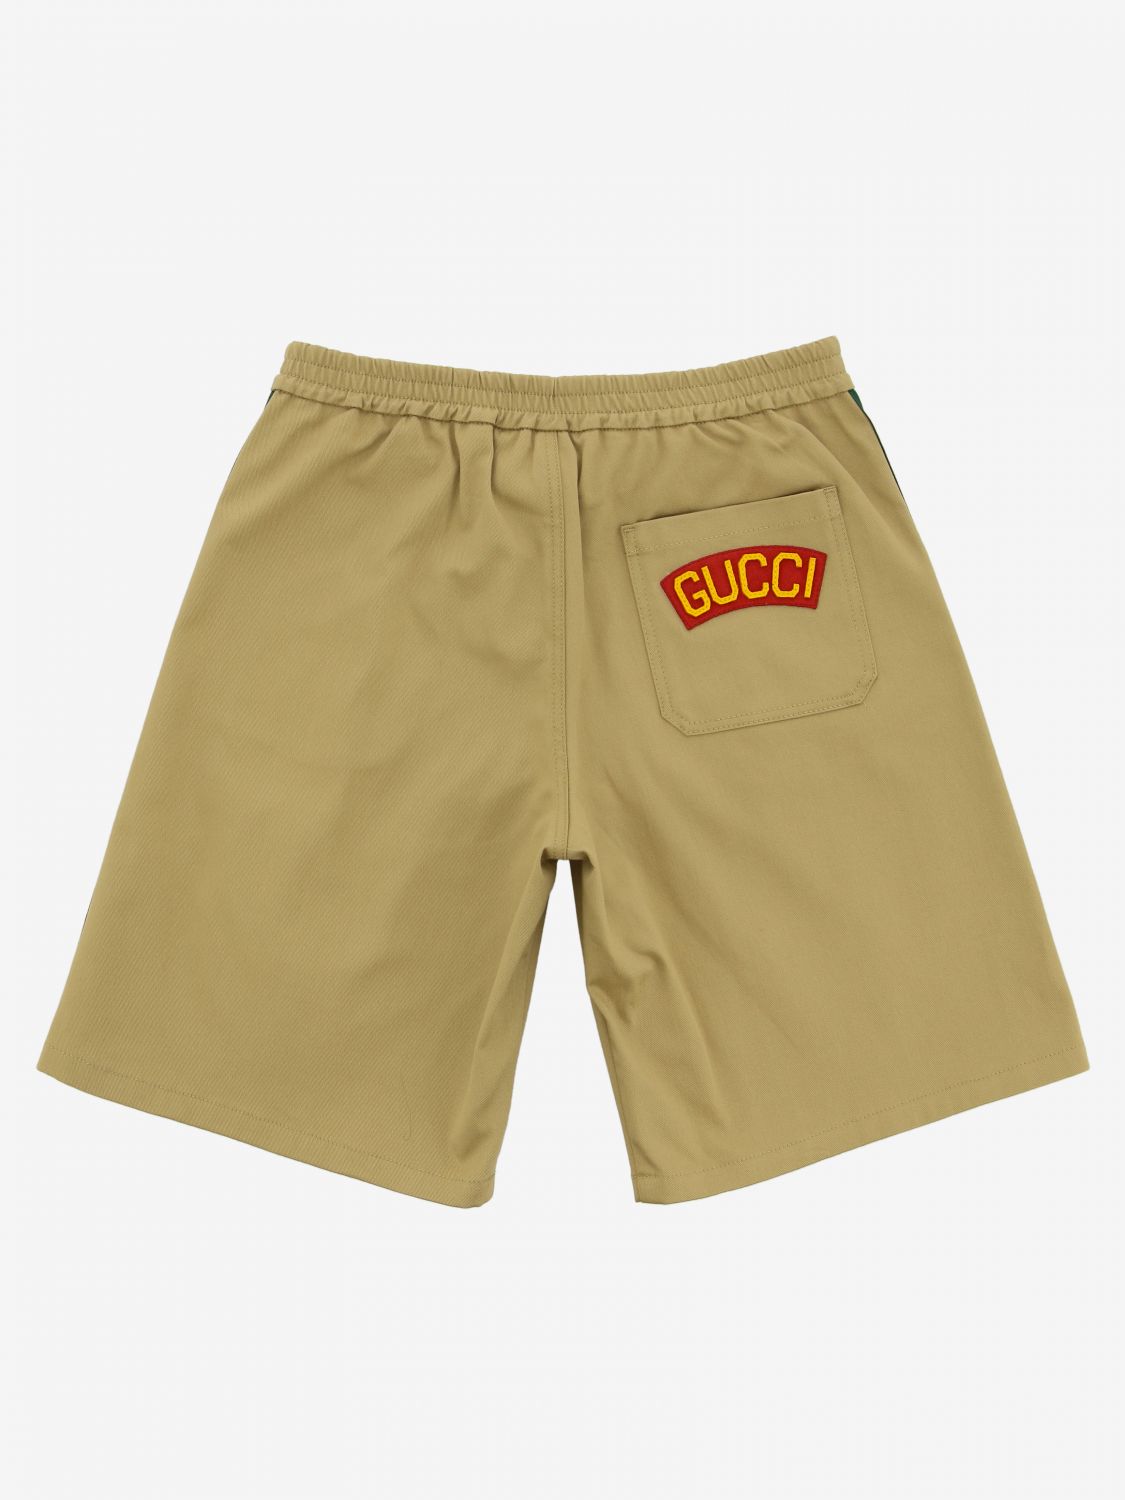 GUCCI: wide shorts with Web bands | Shorts Gucci Kids Beige | Shorts